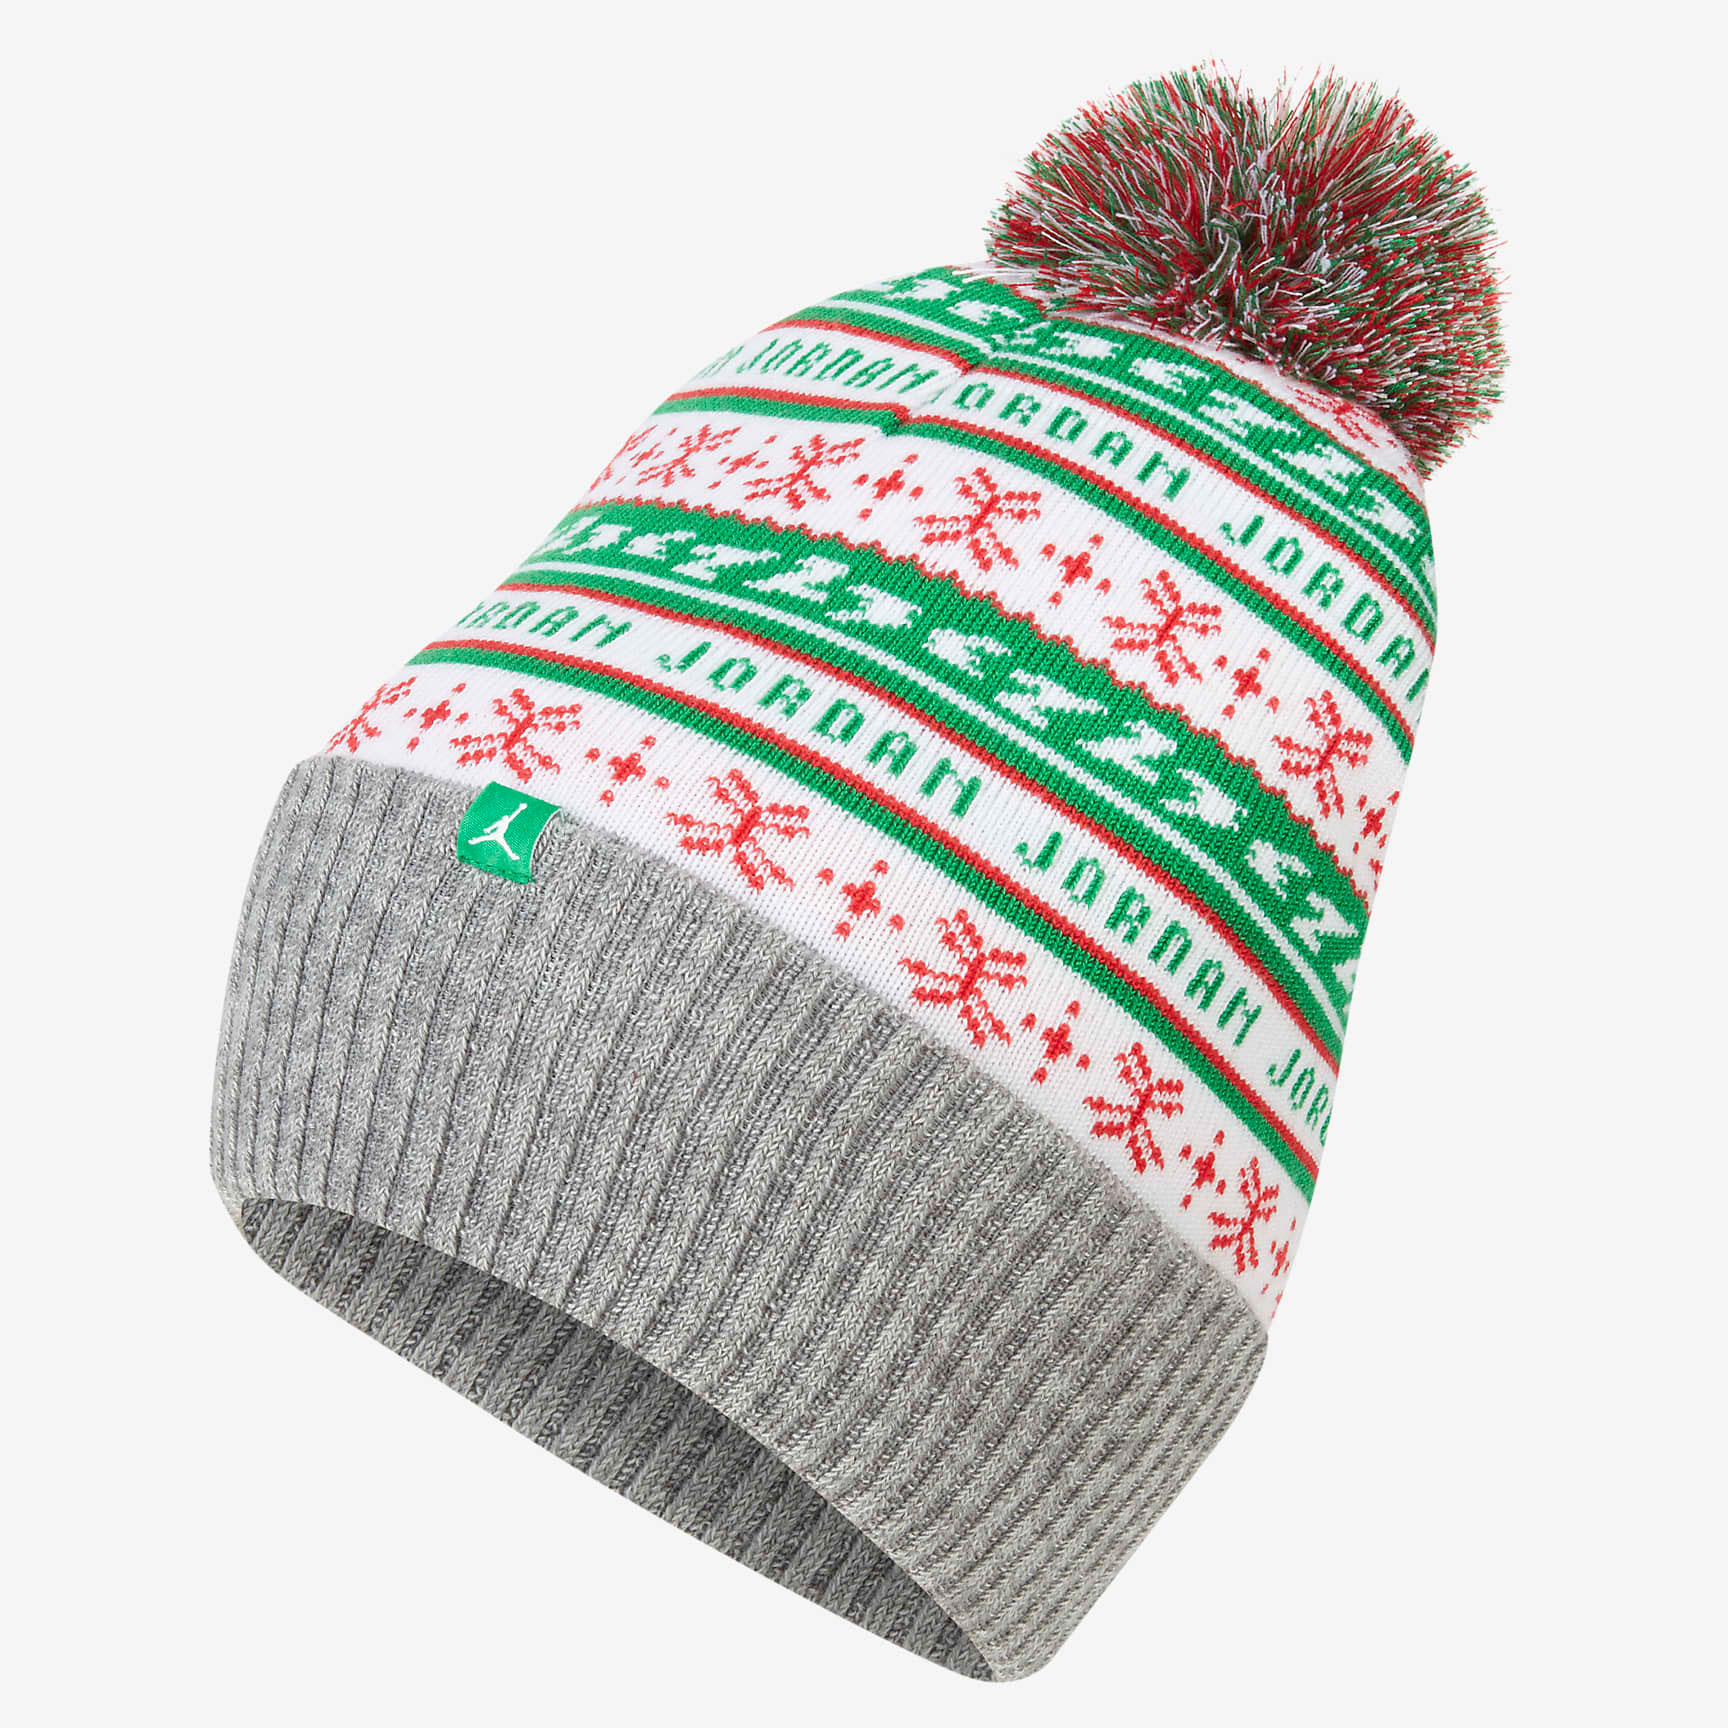 jordan-jumpman-holiday-ugly-sweater-beanie-hat-green-white-red-1